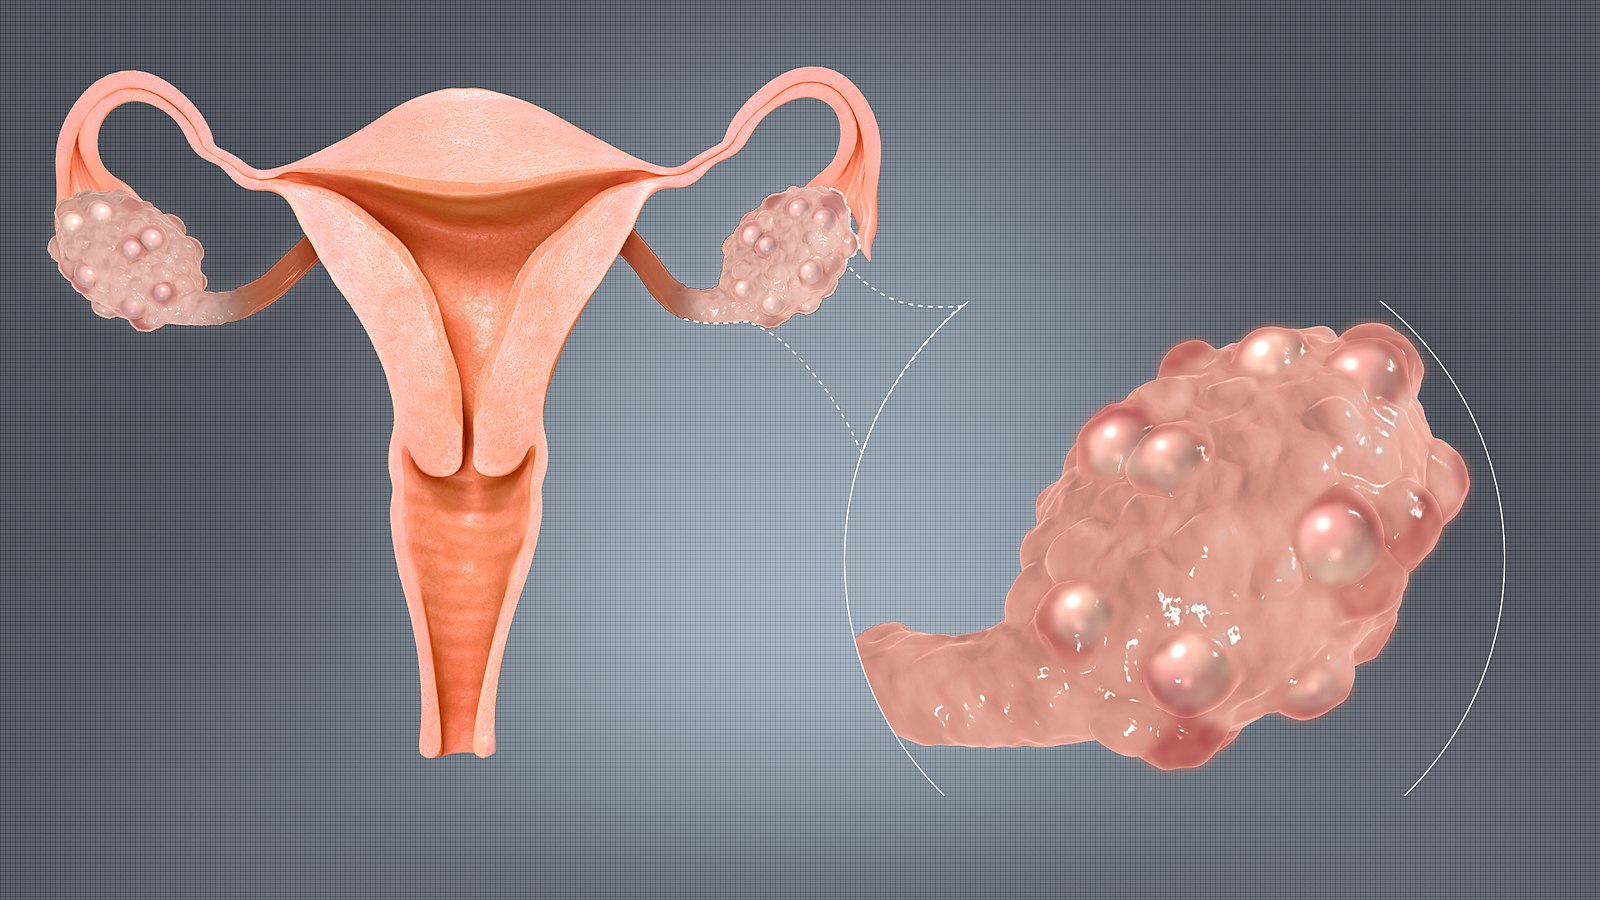 Treating PCOS Naturally – Polycystic Ovary Syndrome